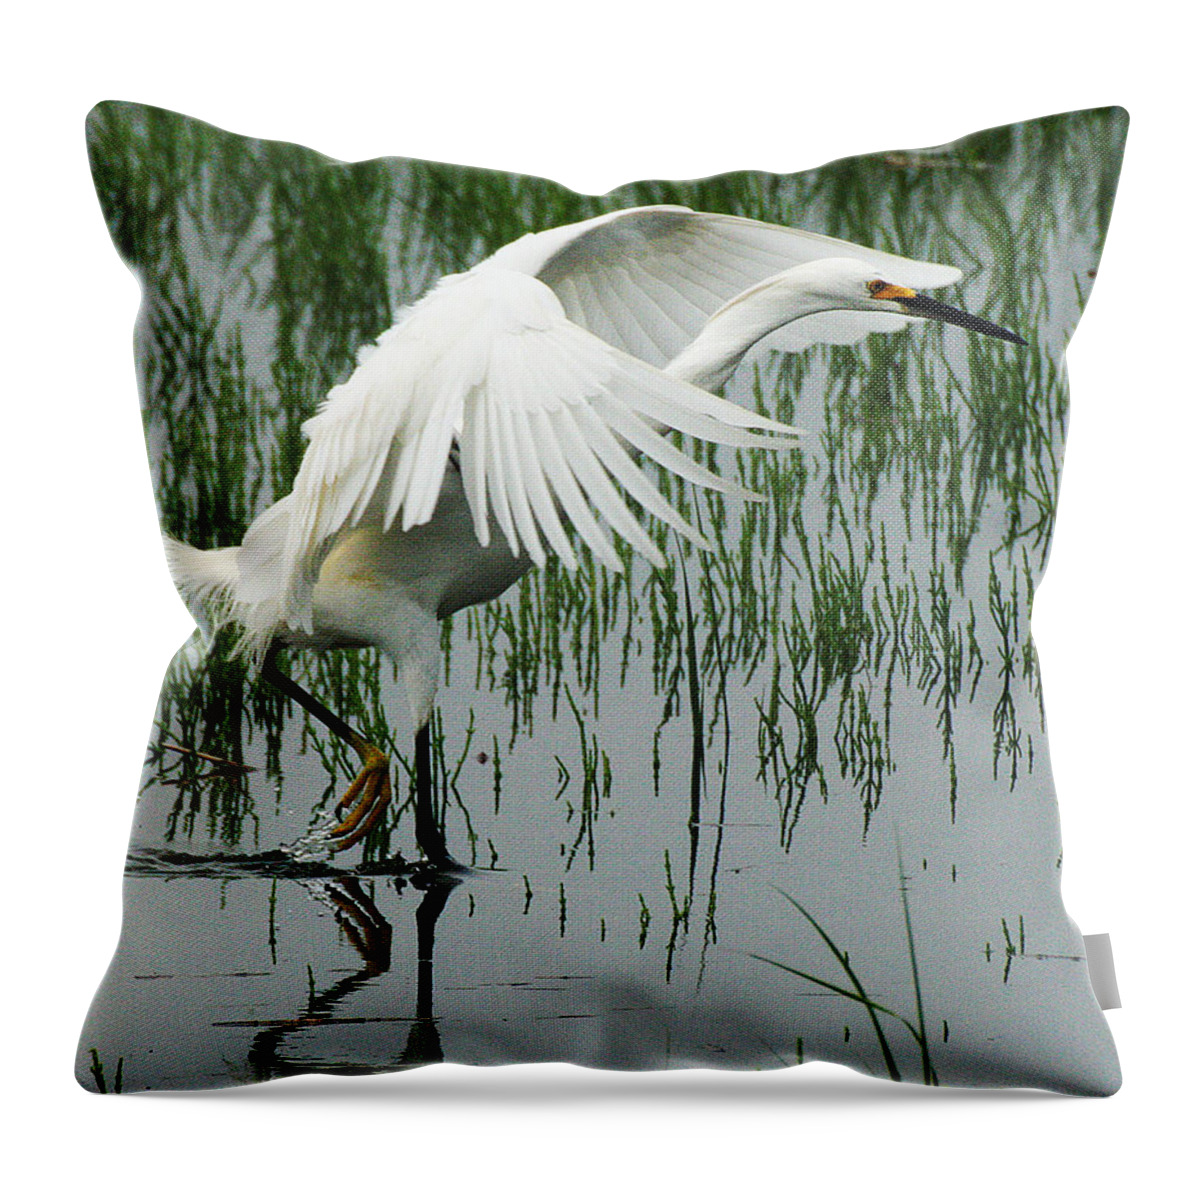 Wildlife Throw Pillow featuring the photograph Arched Wings by William Selander